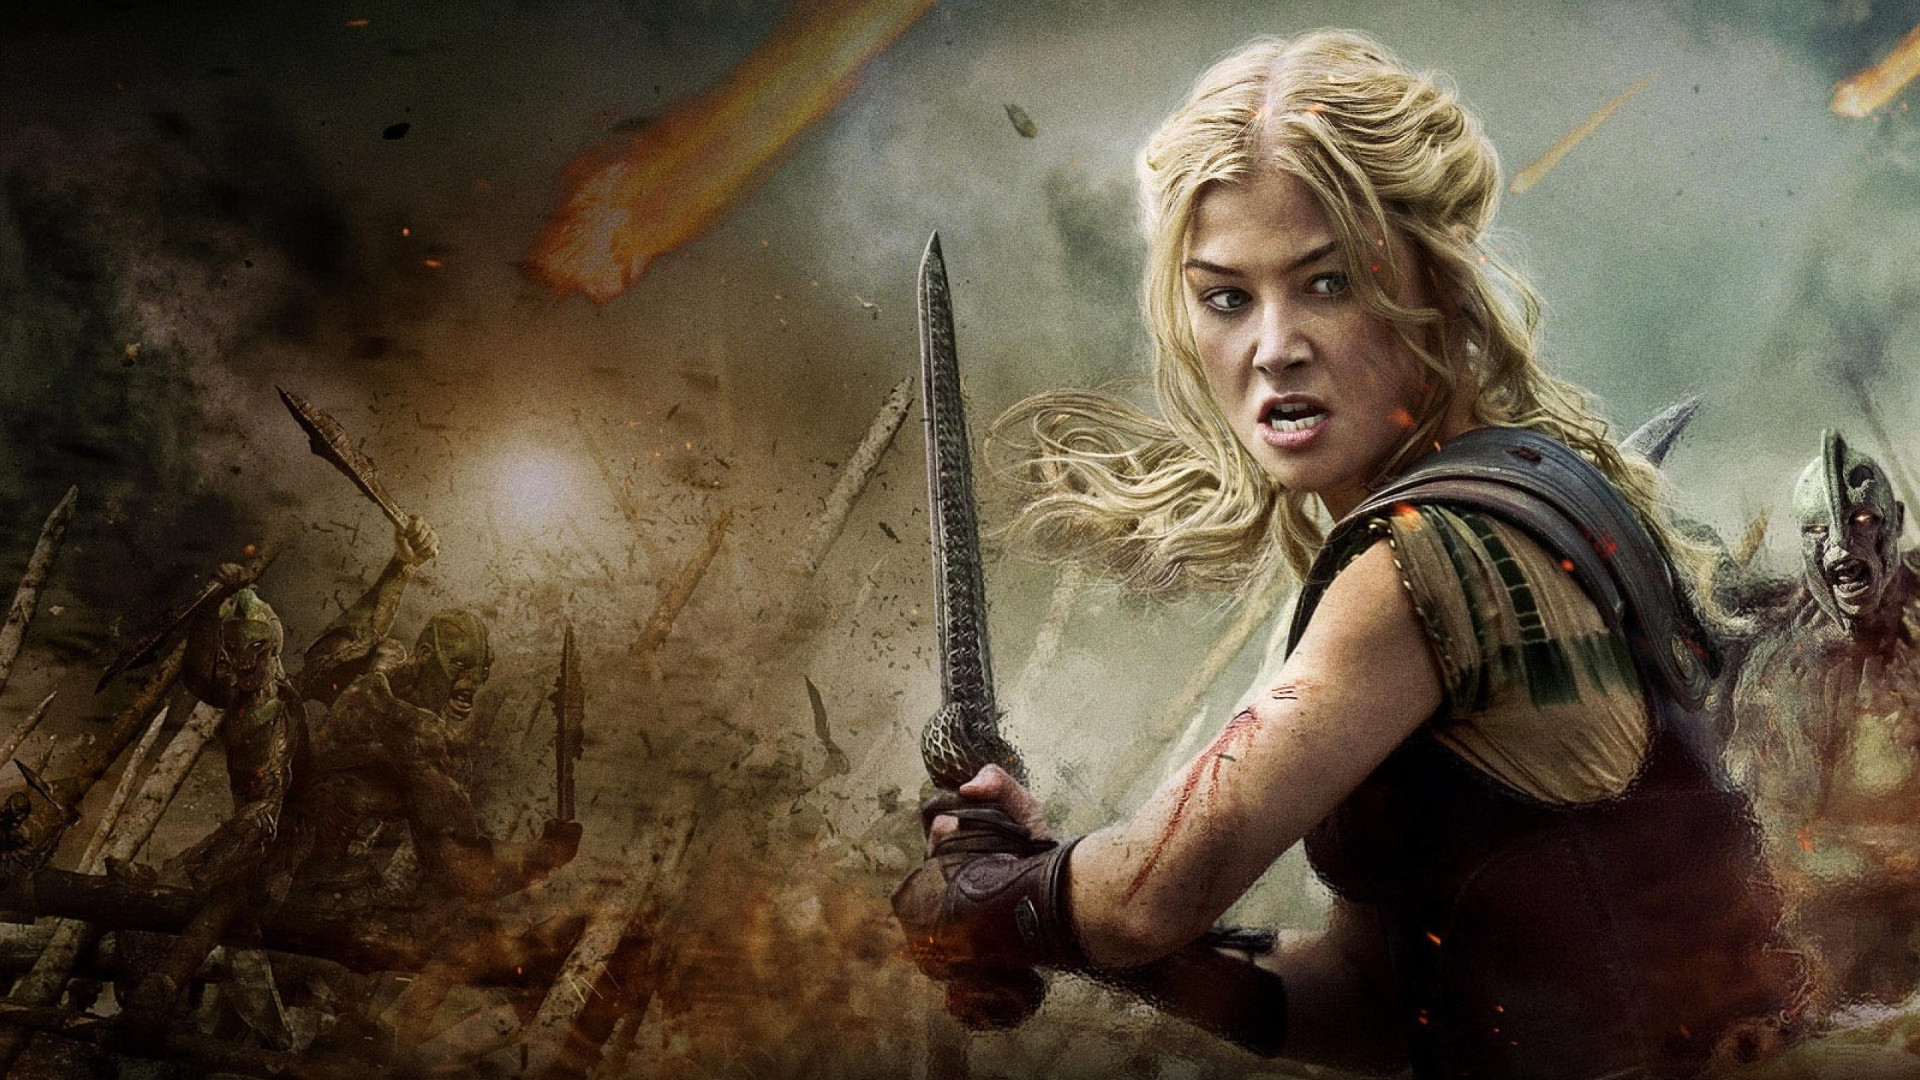 Andromeda Wrath Of The Titans Rosamund Pike 1920x1080